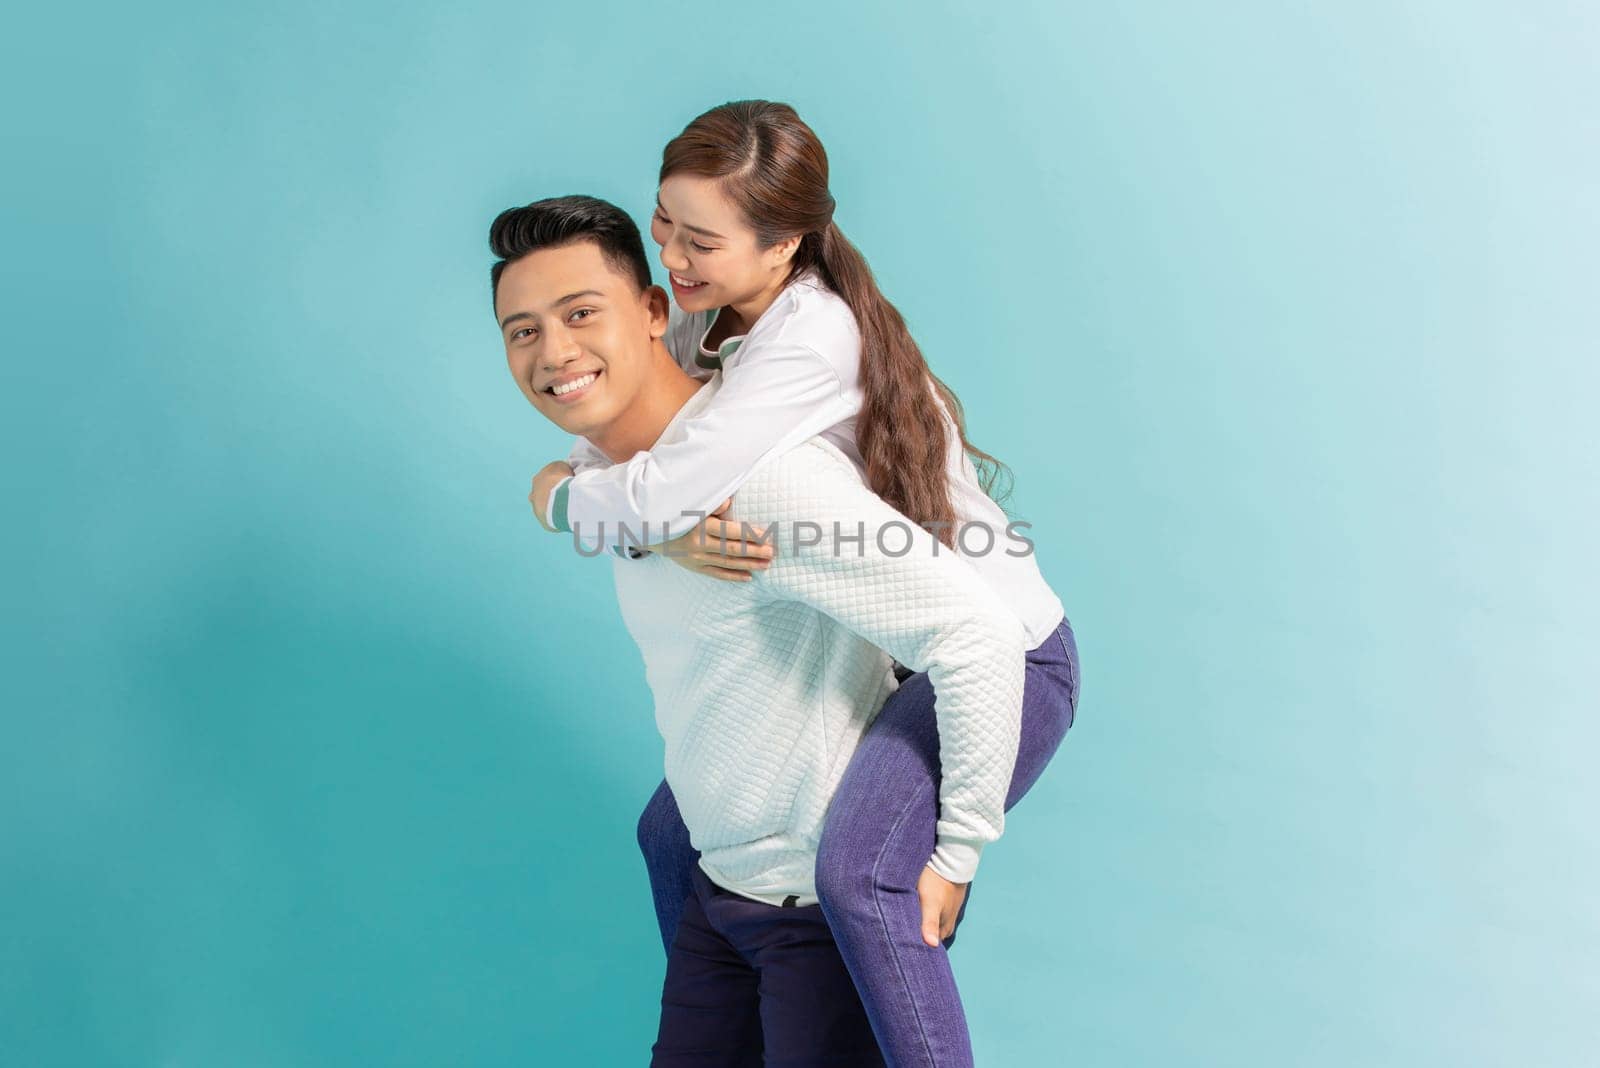 Handsome man giving piggy back to his girlfriend on color by makidotvn